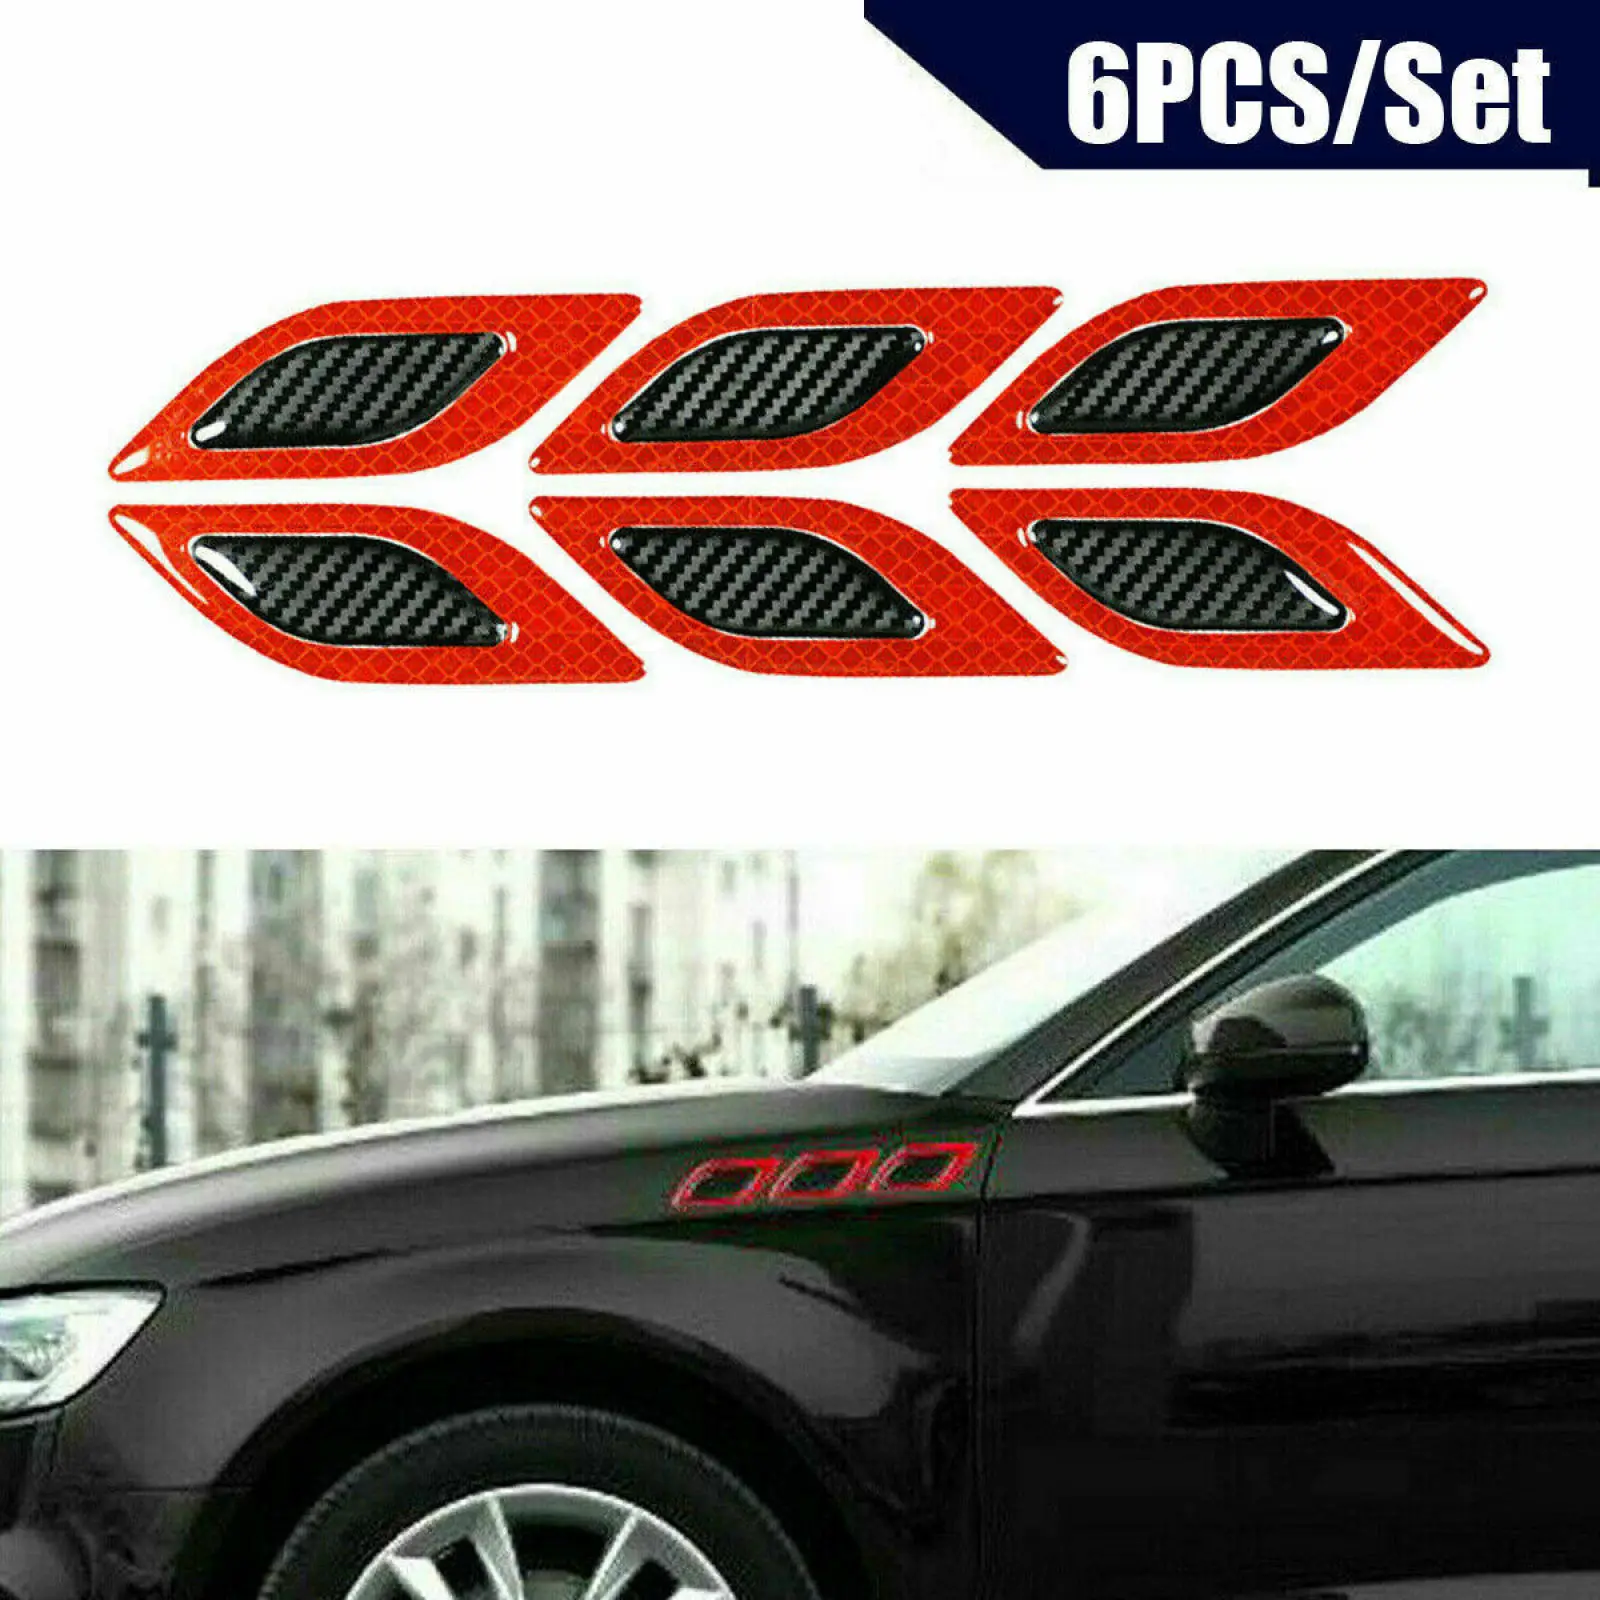 

6Pcs/Set Car Reflective Stickers Anti-Scratch Safety Warning Sticker For Truck Auto Motor Exterior Decorative Accessories